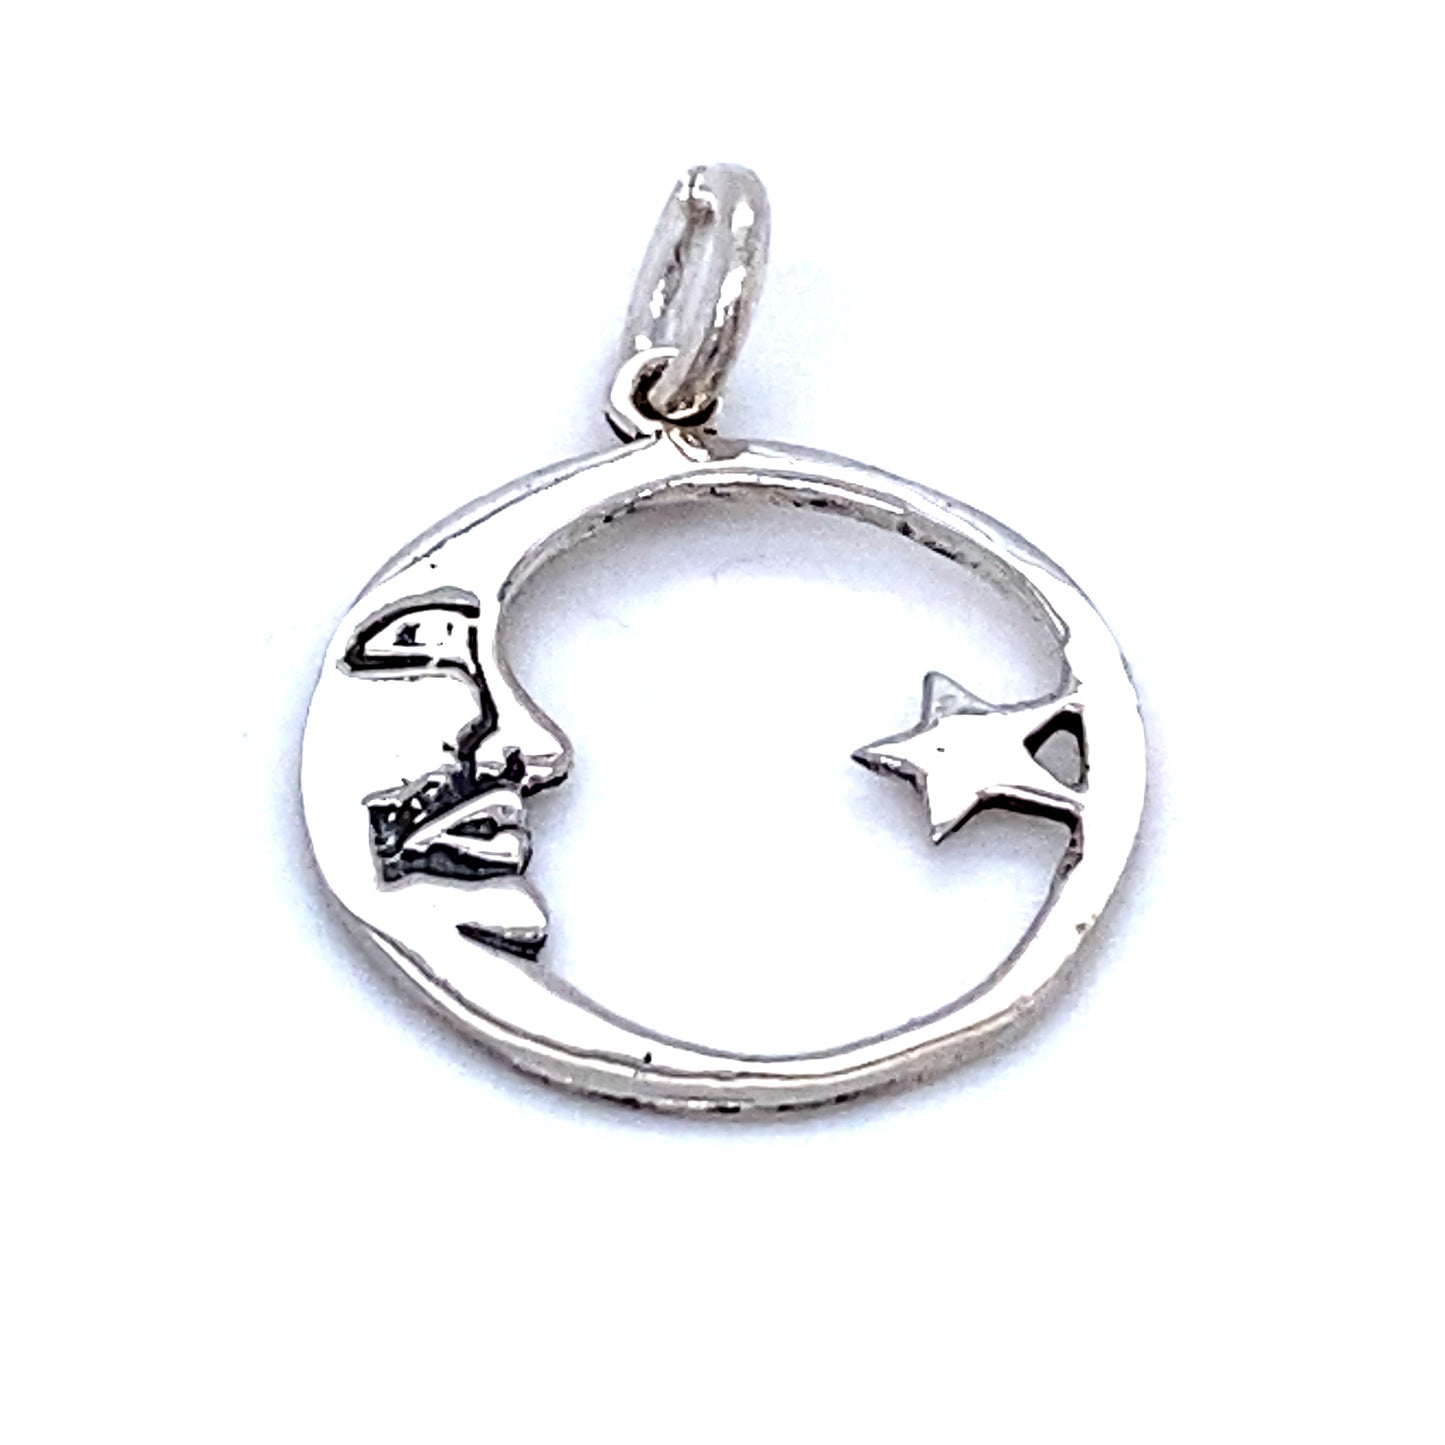 A Super Silver Crescent and Star Pendant featuring a moon and star design in silver.